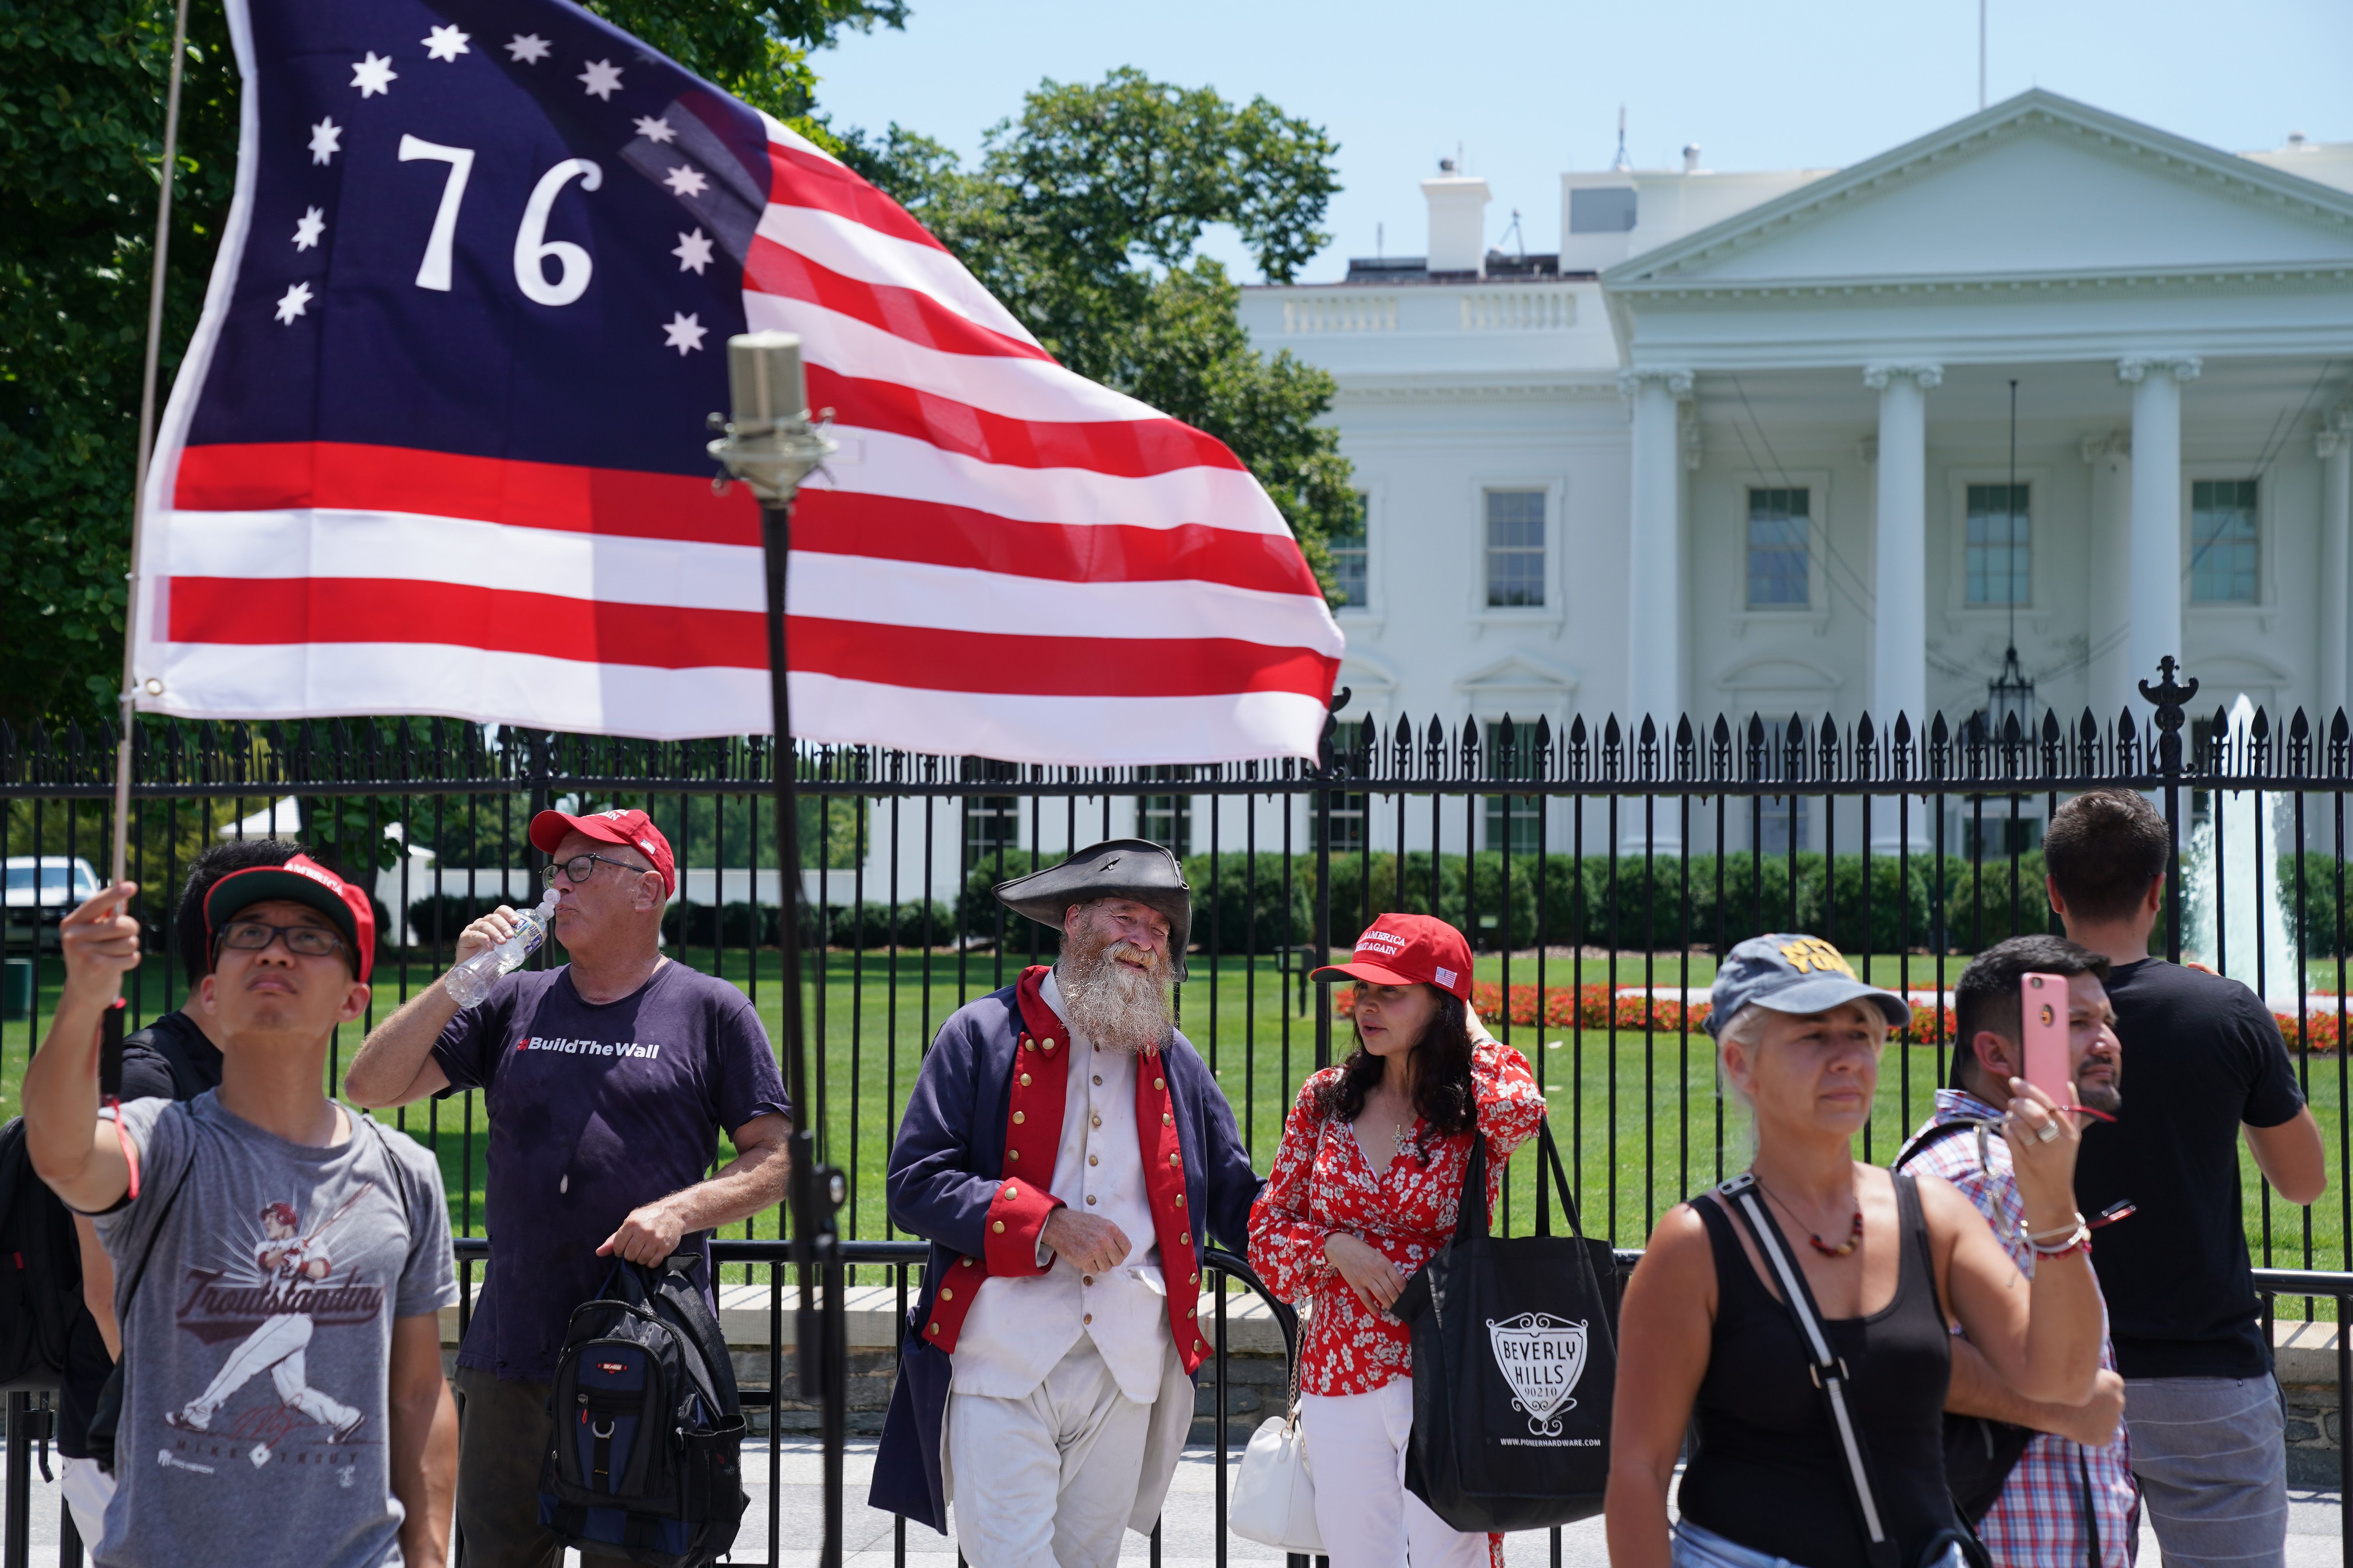 Supporters of U.S. President Donald Trump rally on Pennsylvania Avenue on the north side of the White House July 03, 2019 in Washington, DC.